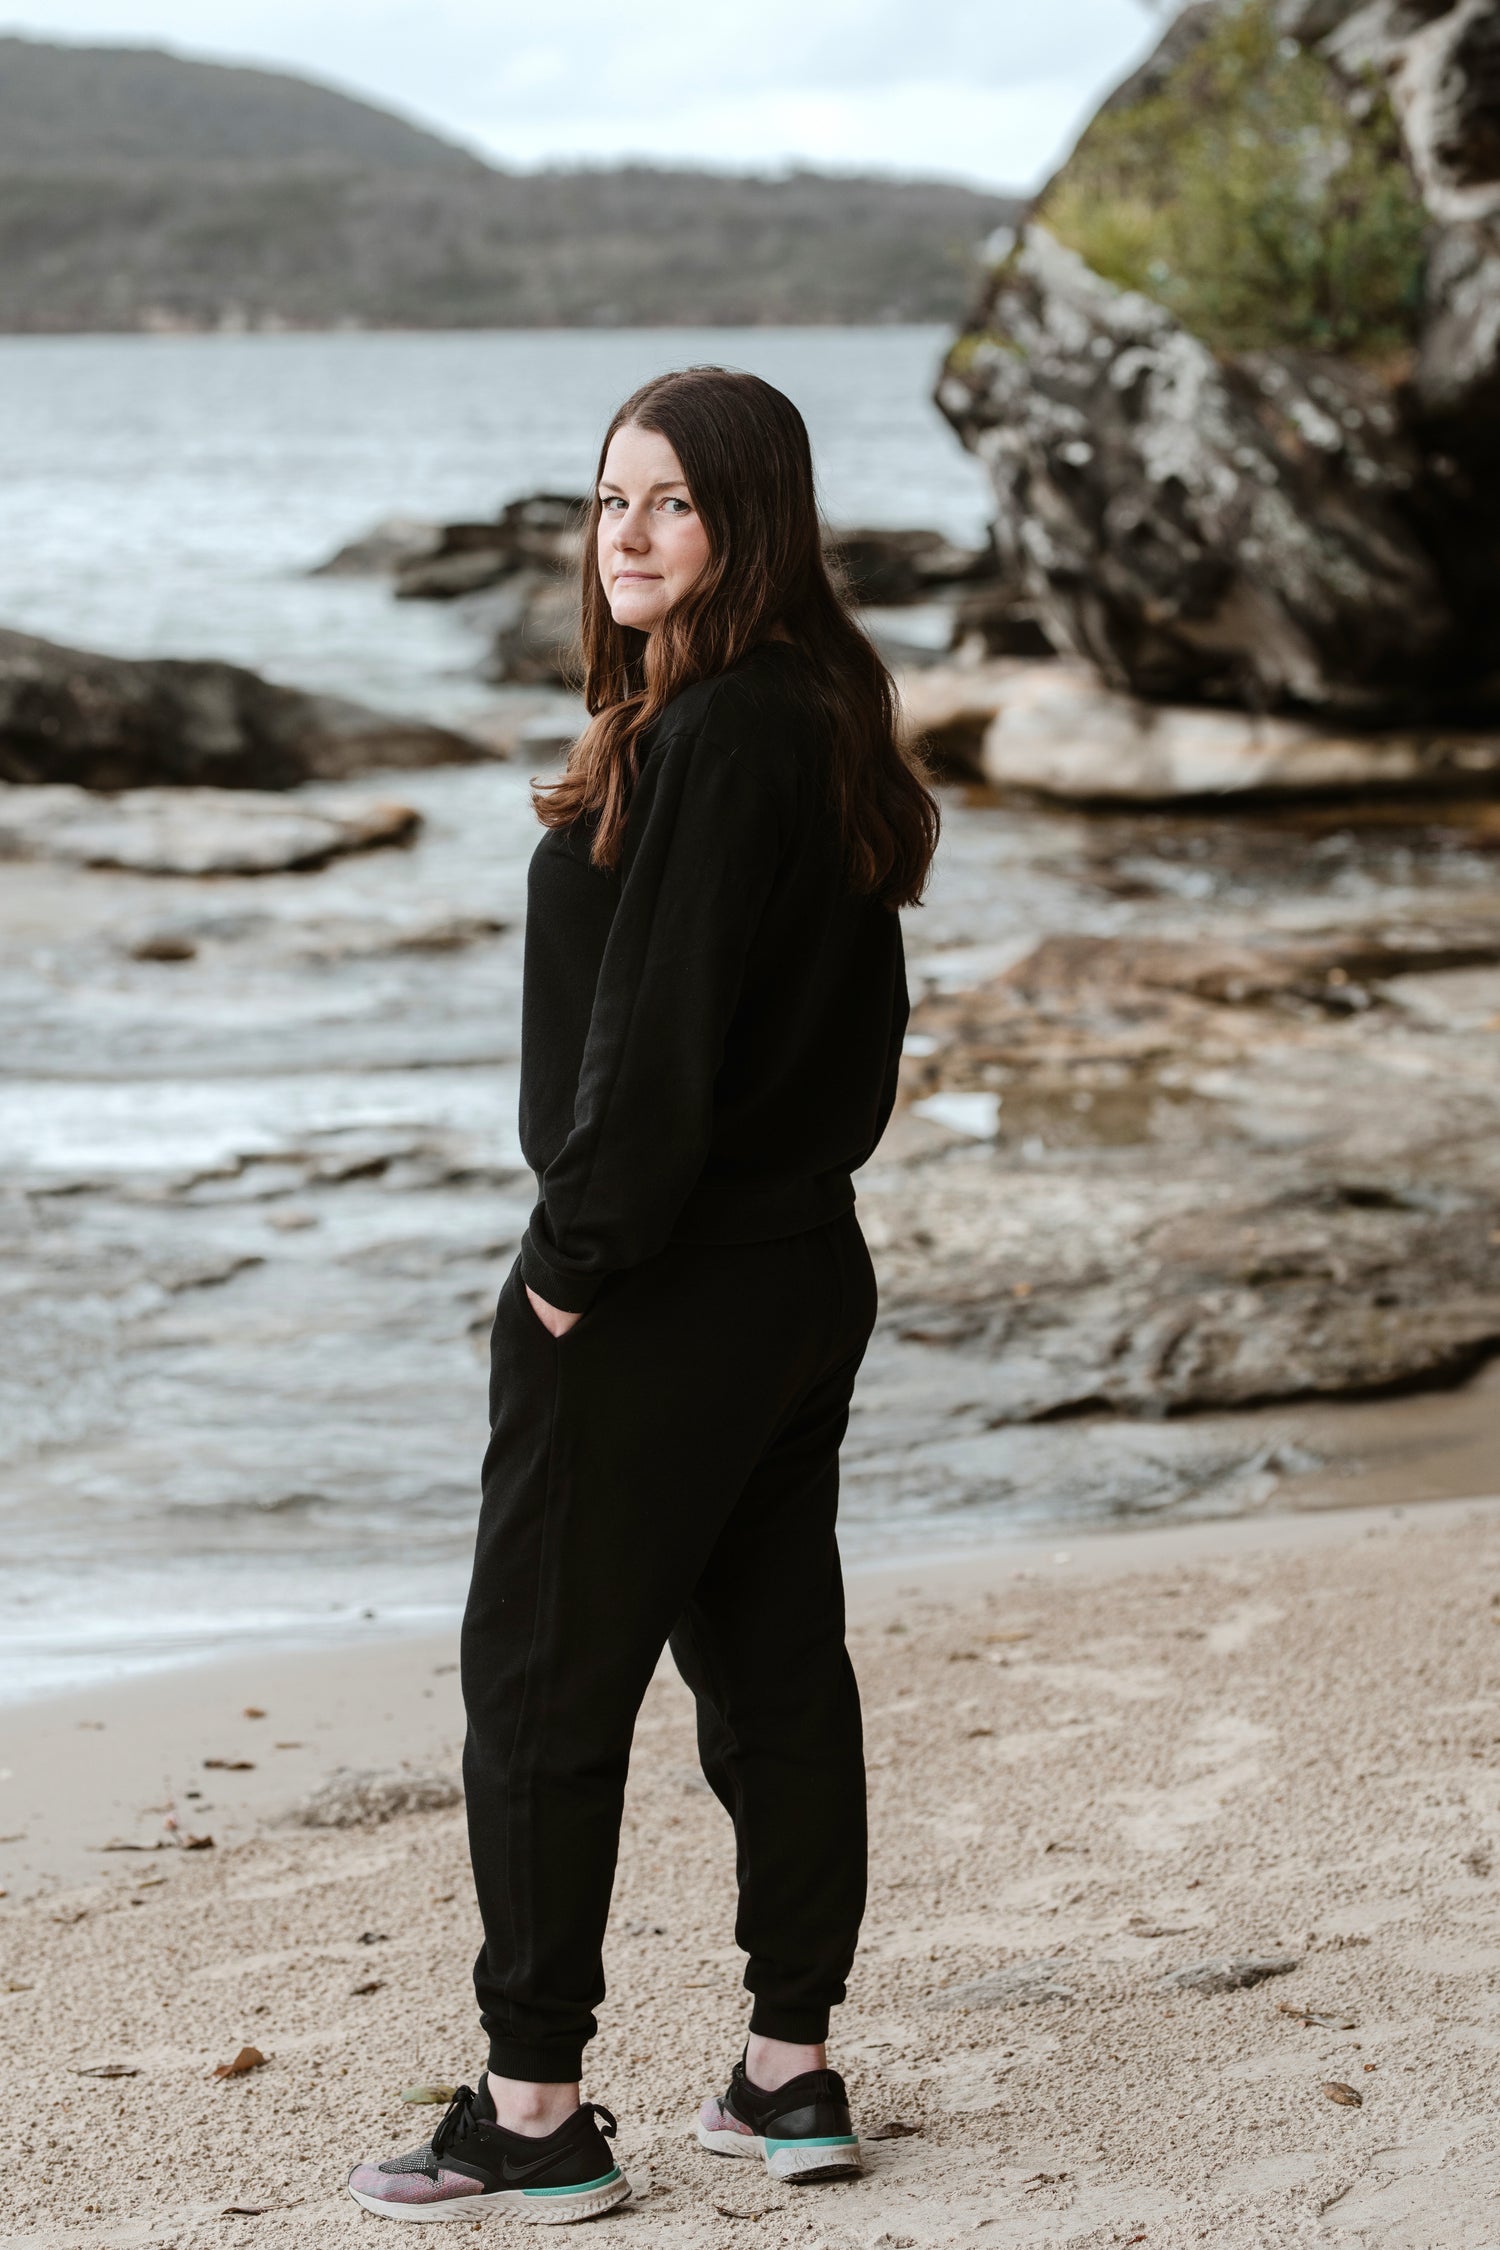 A short woman standing on a beach turning to face the camera. She is wearing a black tracksuit and sneakers.